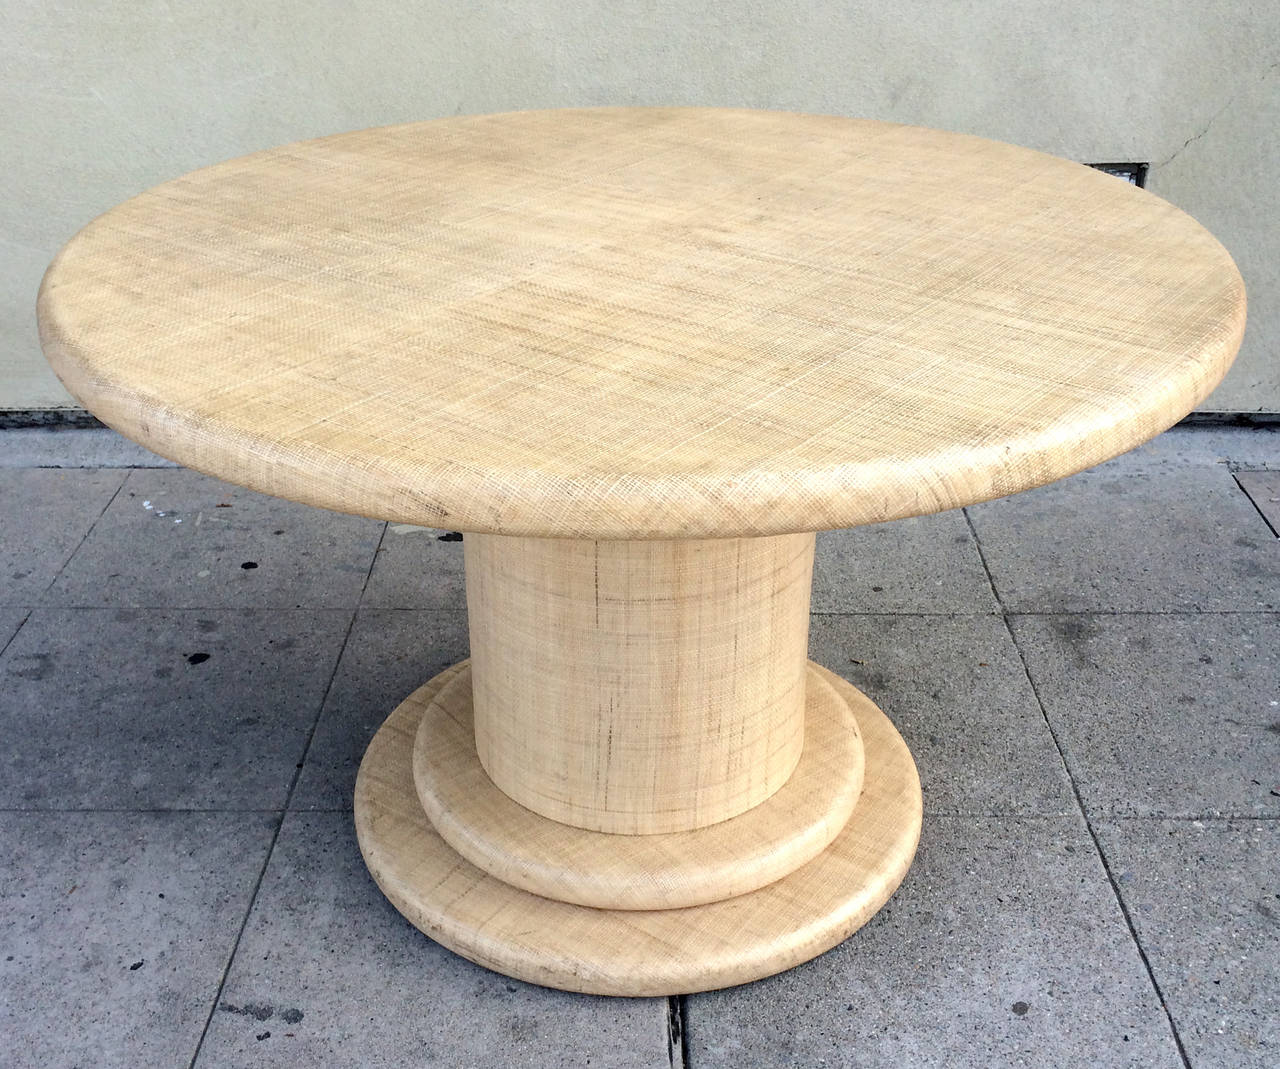 This chic, circular dining table by Harrison Van Horn is entirely wrapped in grasscloth with a clear protective coating. The base, comprised of two circles of wrapped wood, supports a round column that holds up the 4 foot wide surface.  Underneath